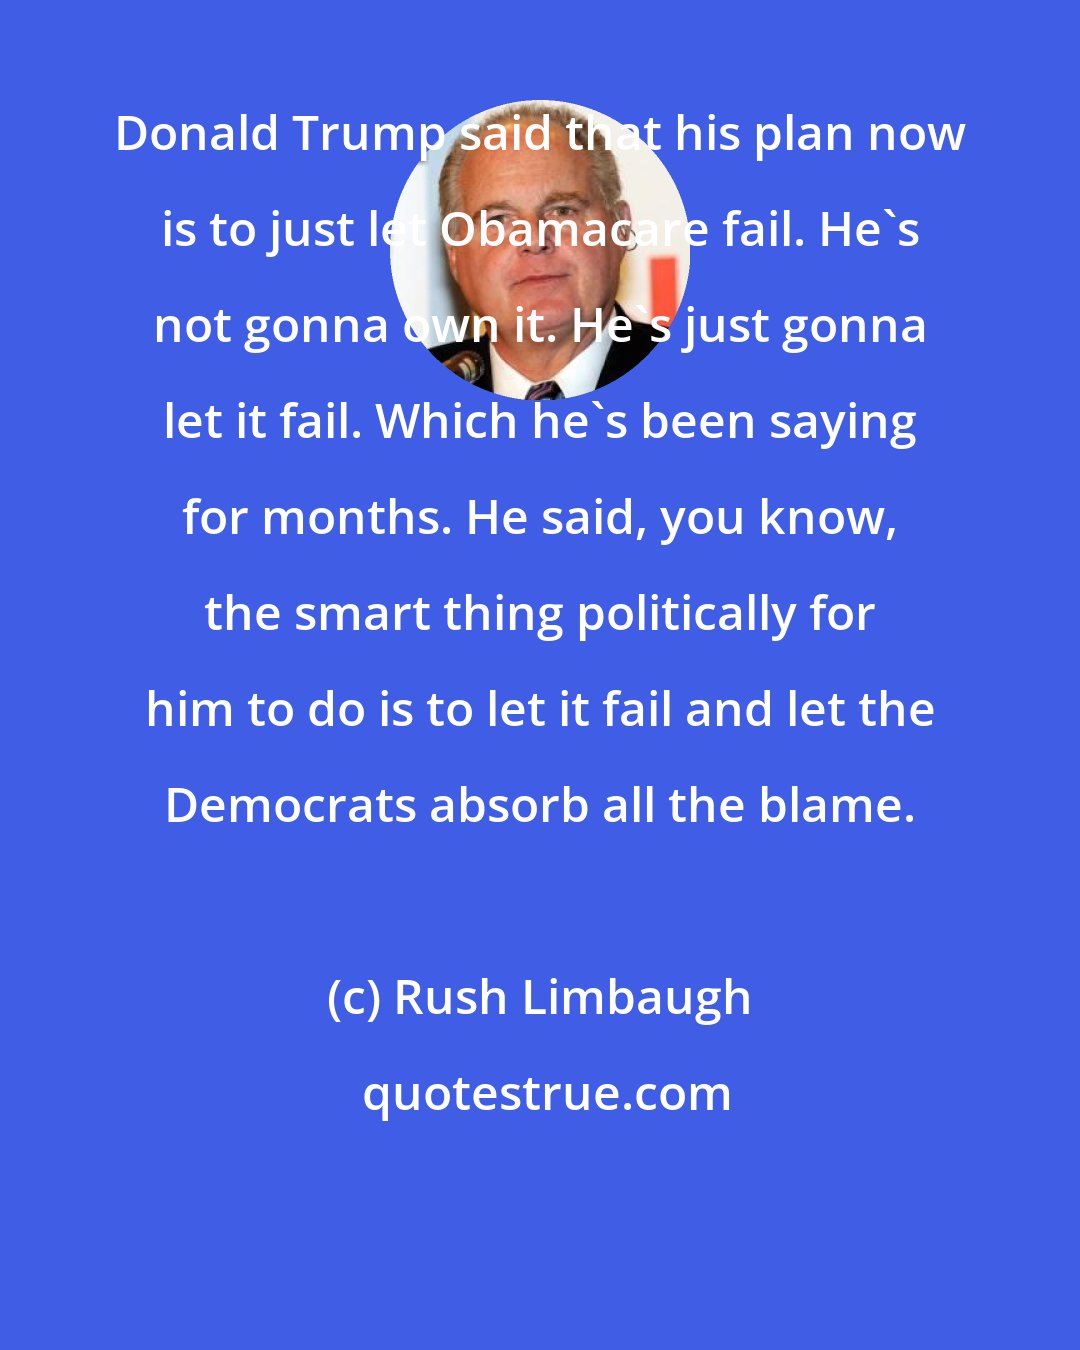 Rush Limbaugh: Donald Trump said that his plan now is to just let Obamacare fail. He's not gonna own it. He's just gonna let it fail. Which he's been saying for months. He said, you know, the smart thing politically for him to do is to let it fail and let the Democrats absorb all the blame.